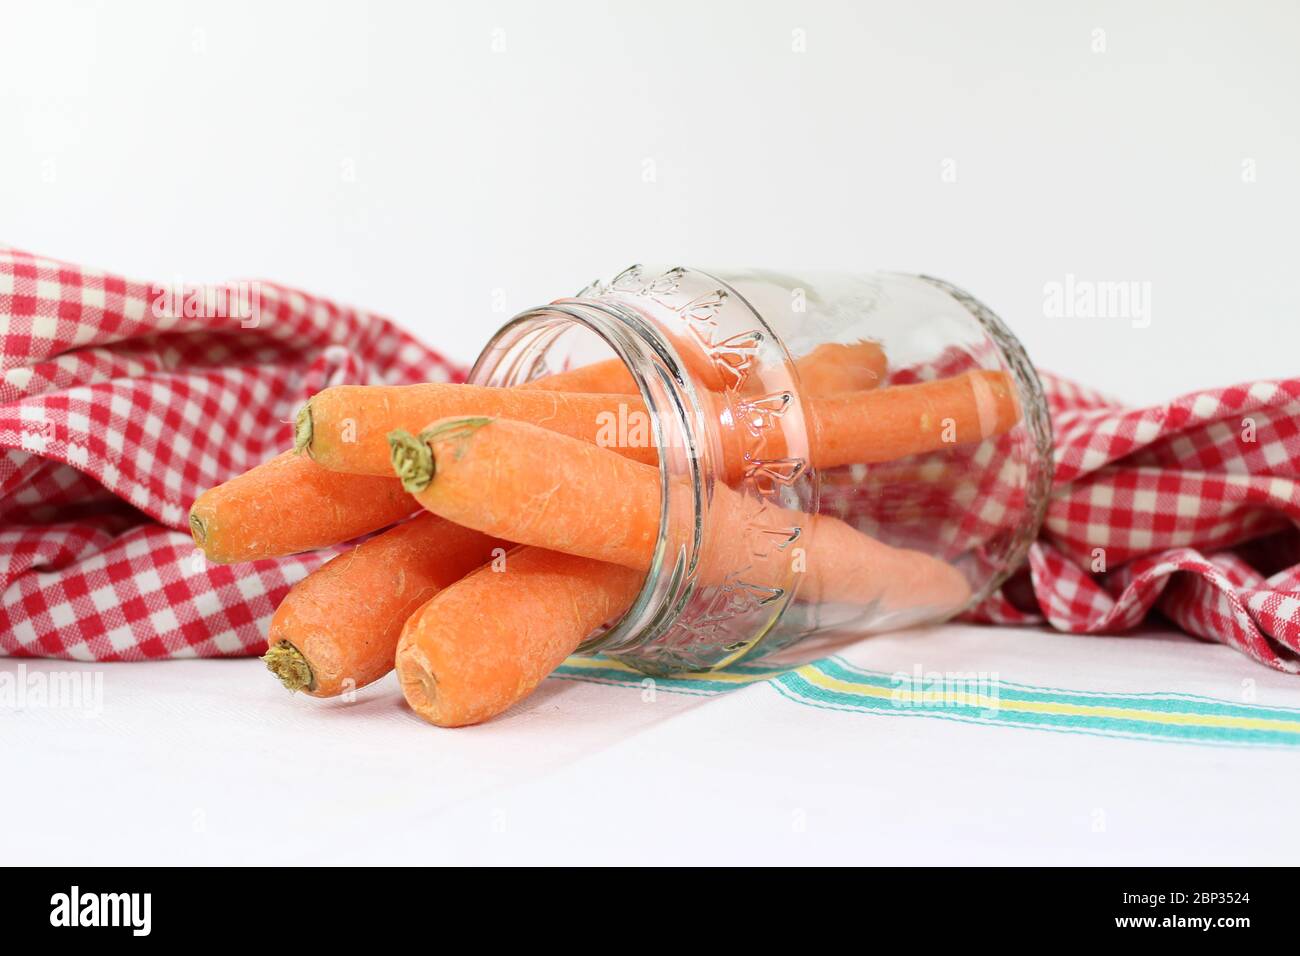 Carrots in the glass jar, with the red and white checkered tablecloth and a cotton towel with a colored printed line. Stock Photo